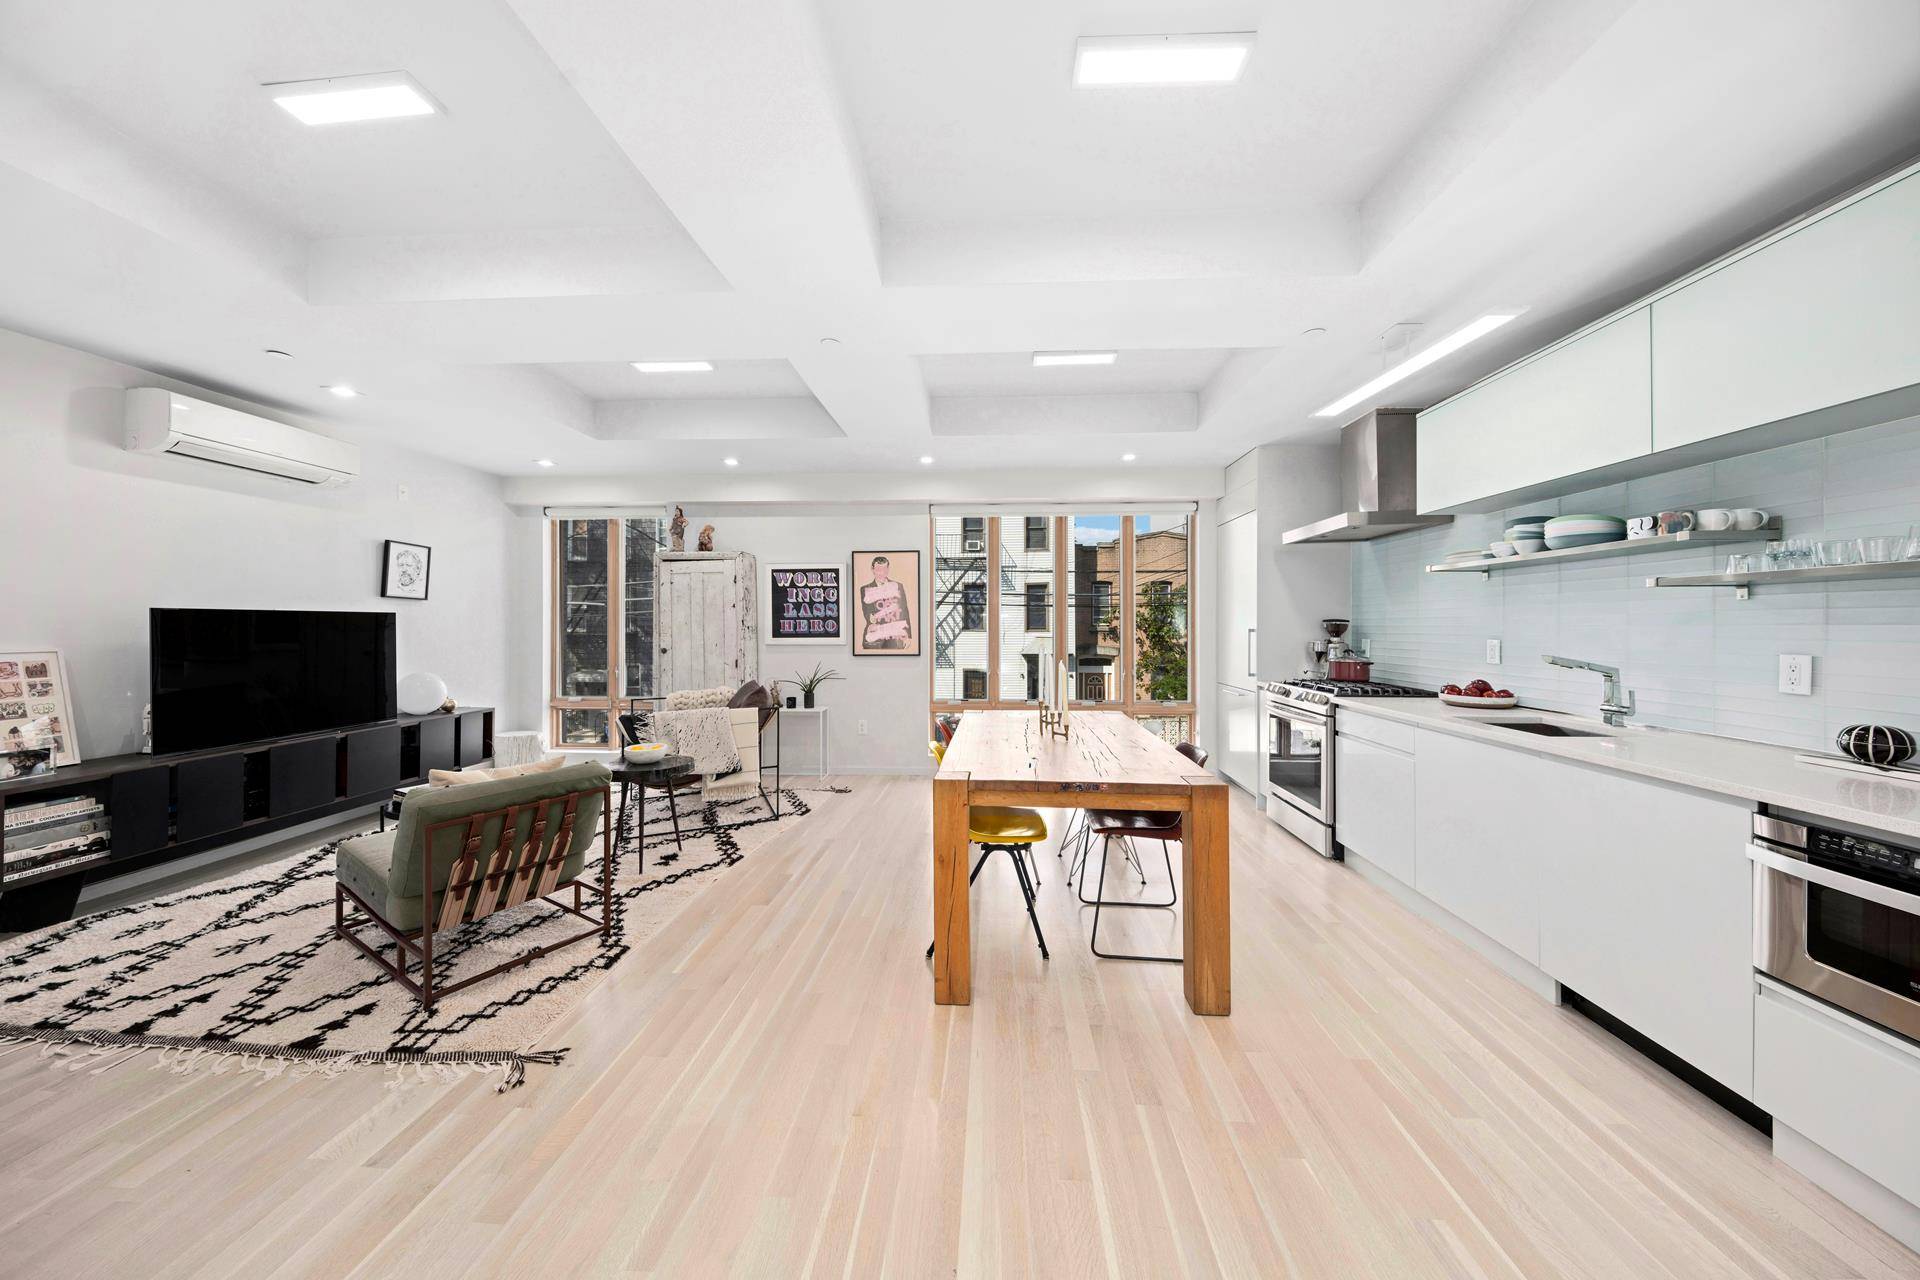 Welcome to 210 Jackson Street, a new 5 unit boutique elevator condominium built in 2018, offering stunning full floor homes flooded with natural light from floor to ceiling windows facing ...